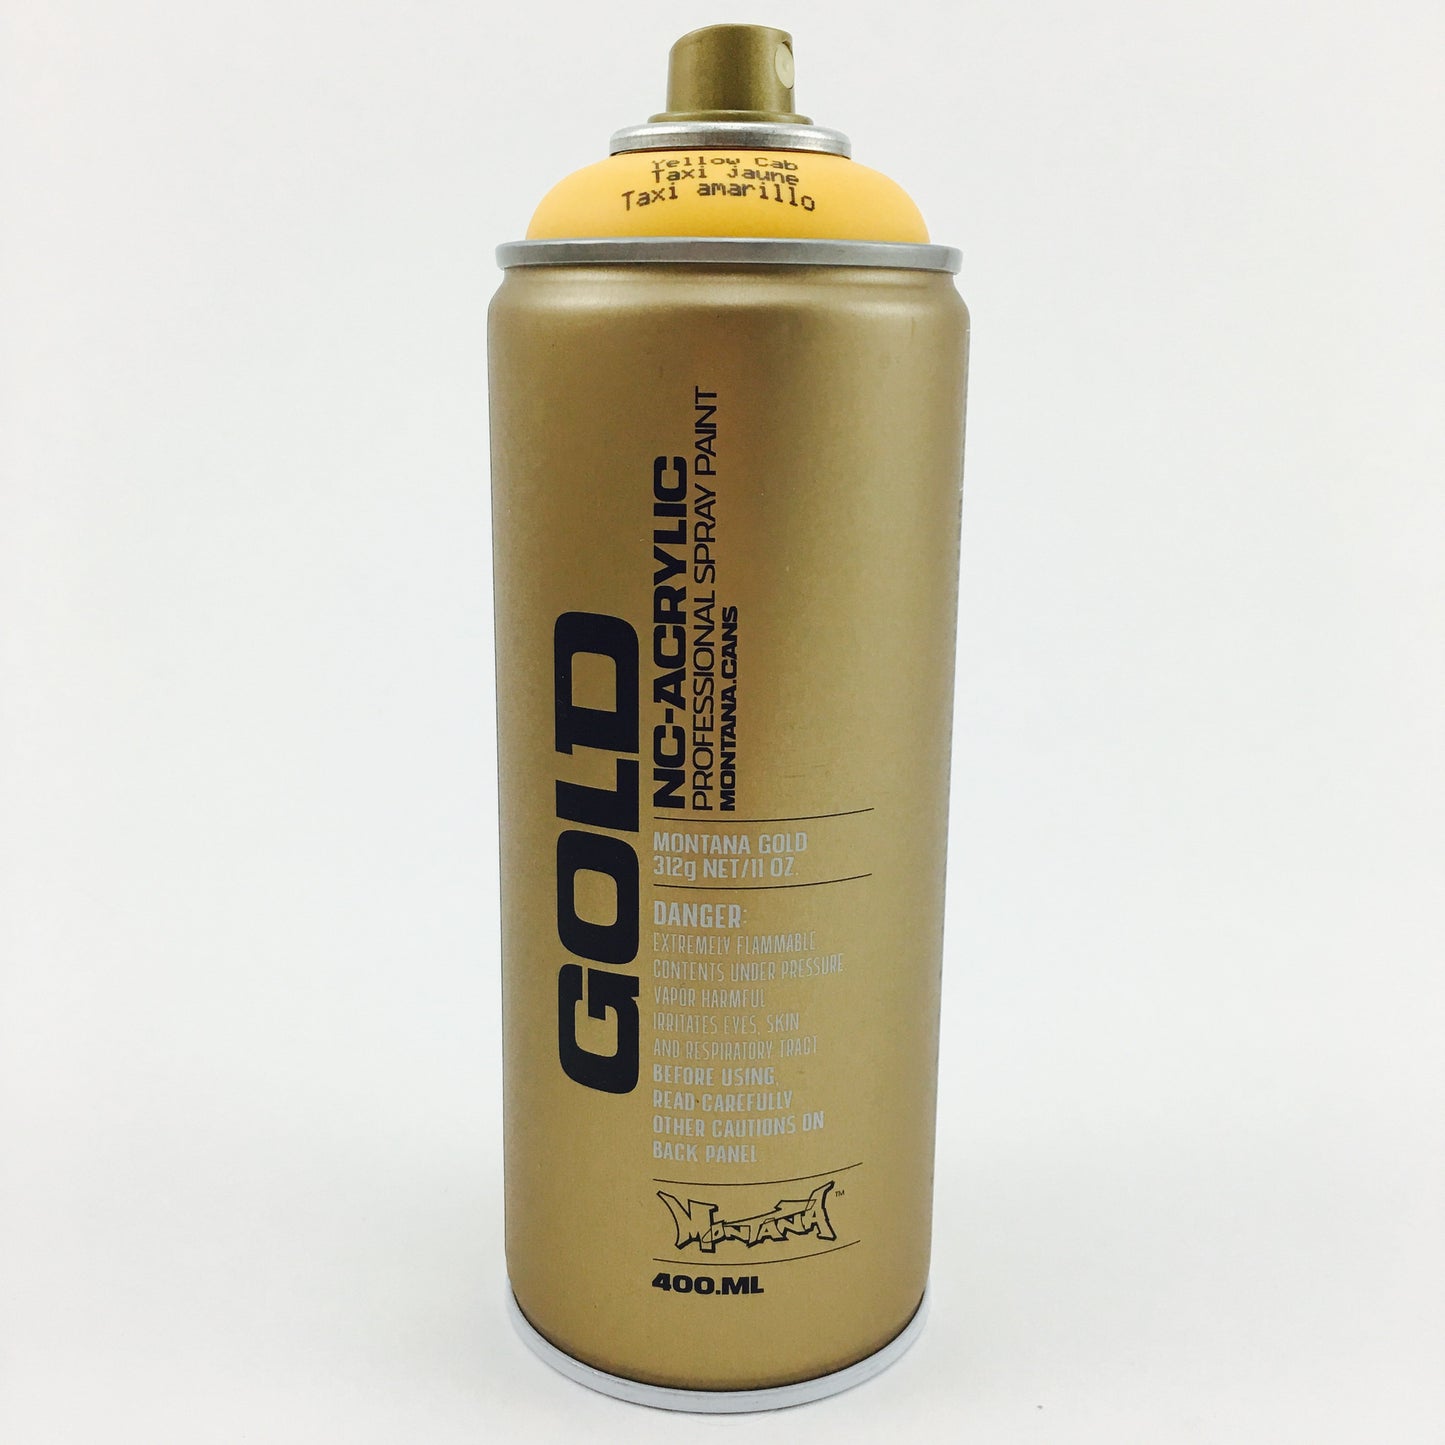 Montana Spray Paint - Gold Edition - Yellow Cab by Montana - K. A. Artist Shop